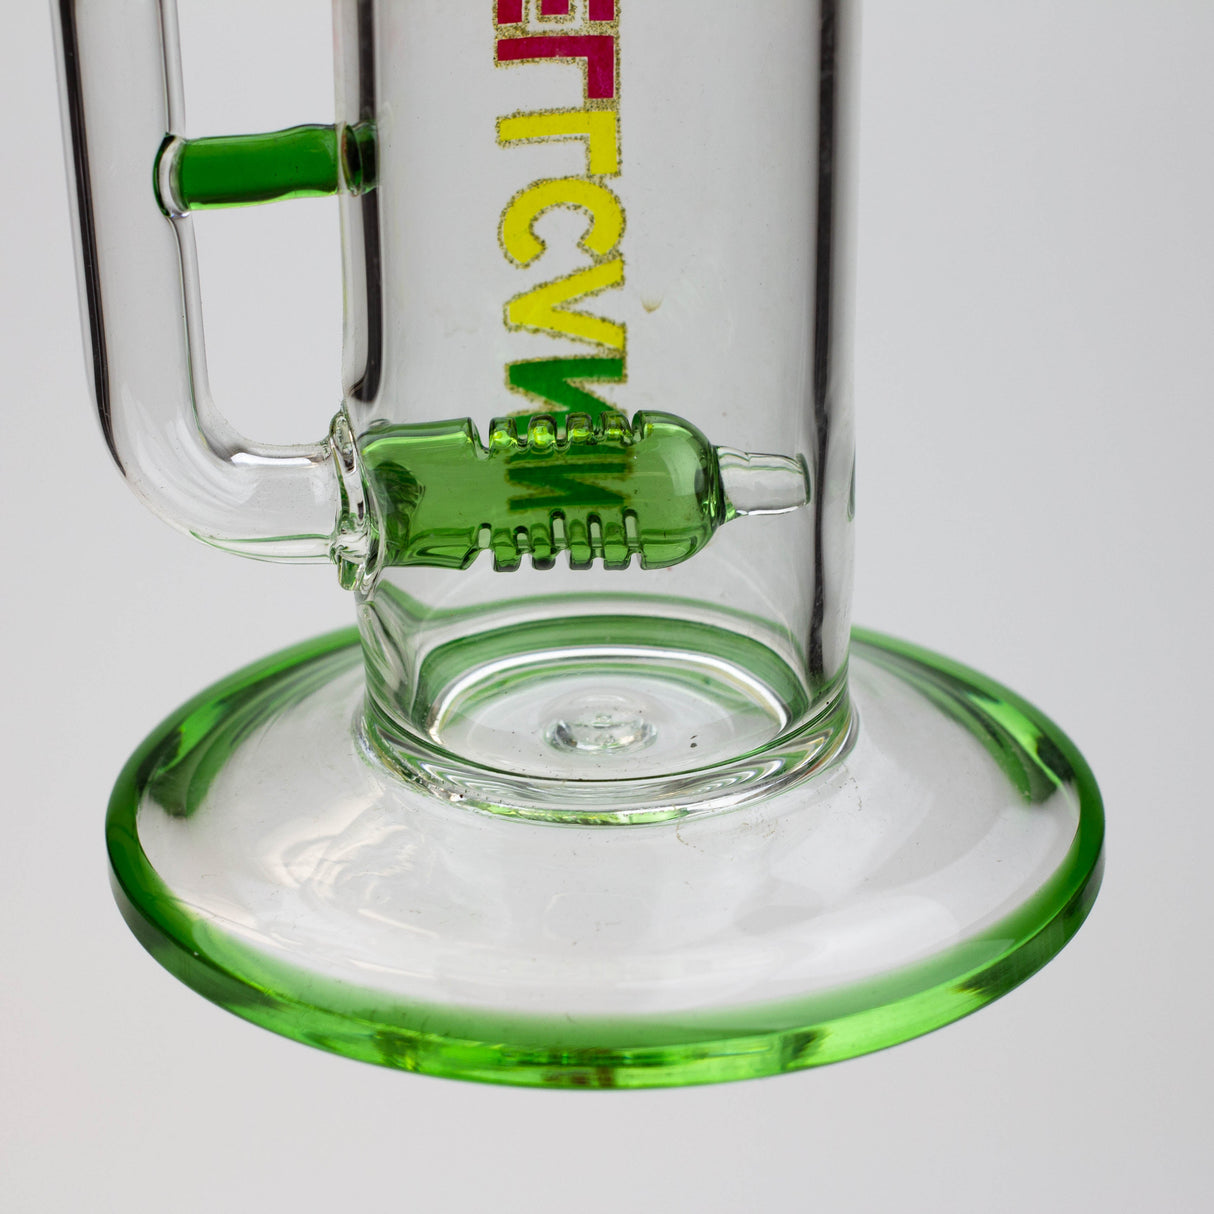 9" WellCann Inline diffuser Rig with Banger